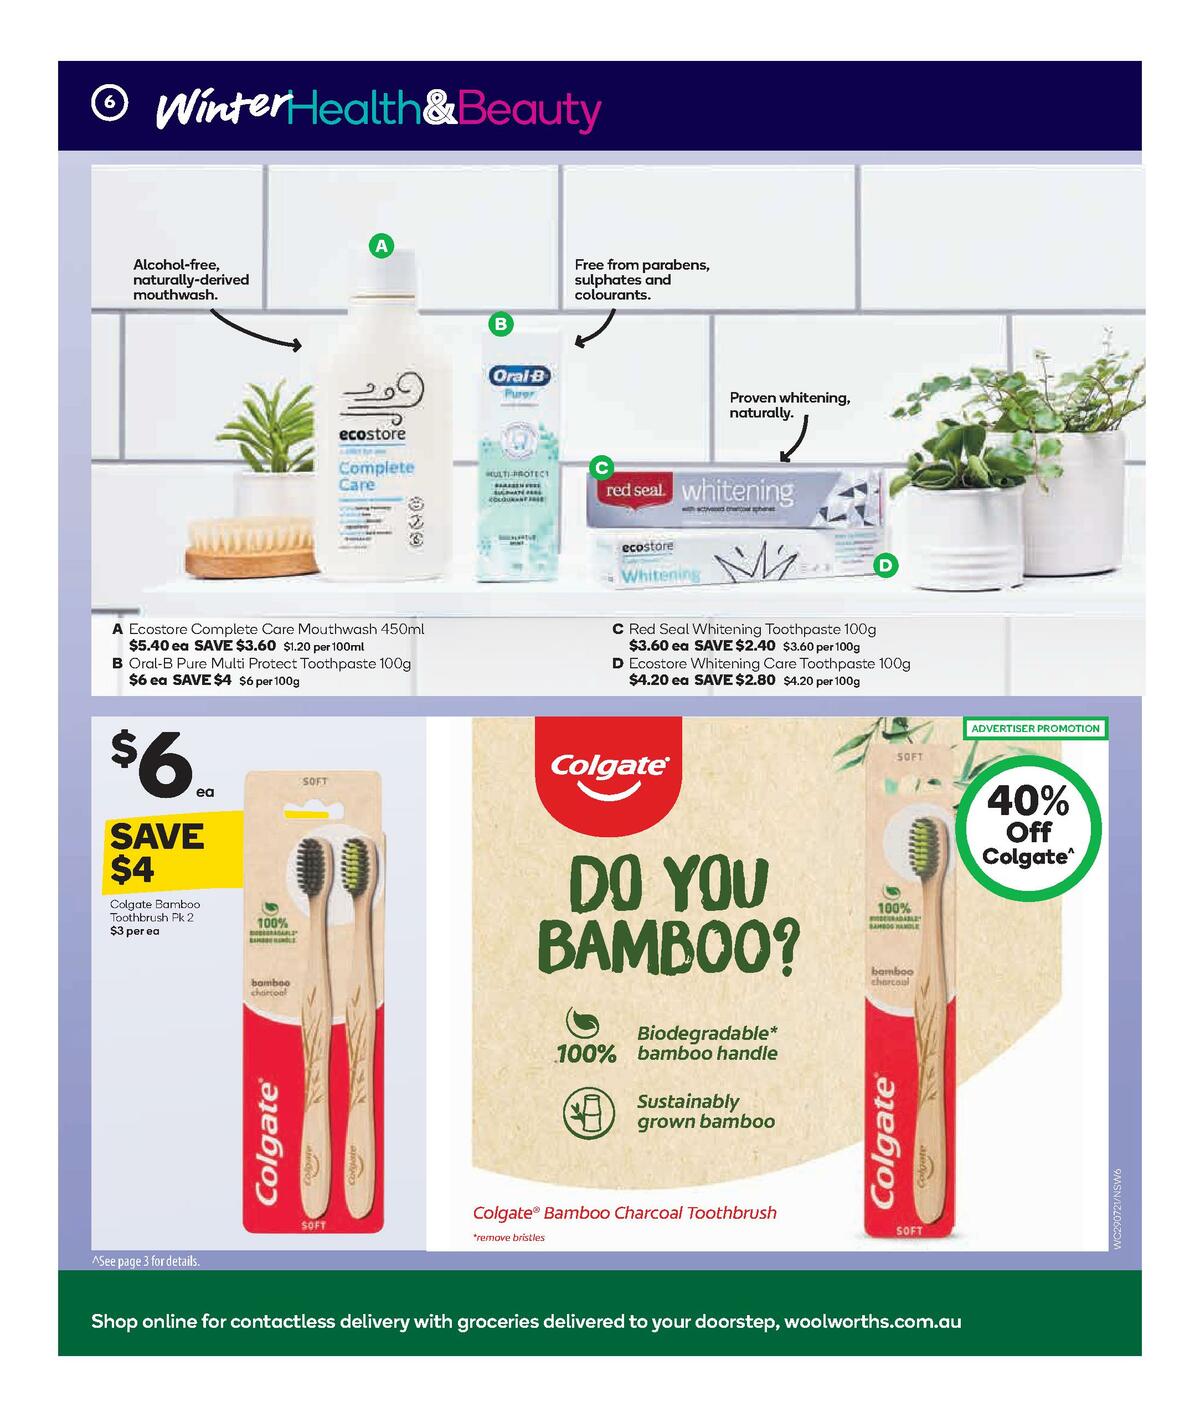 Woolworths Health & Beauty Catalogues from 29 July